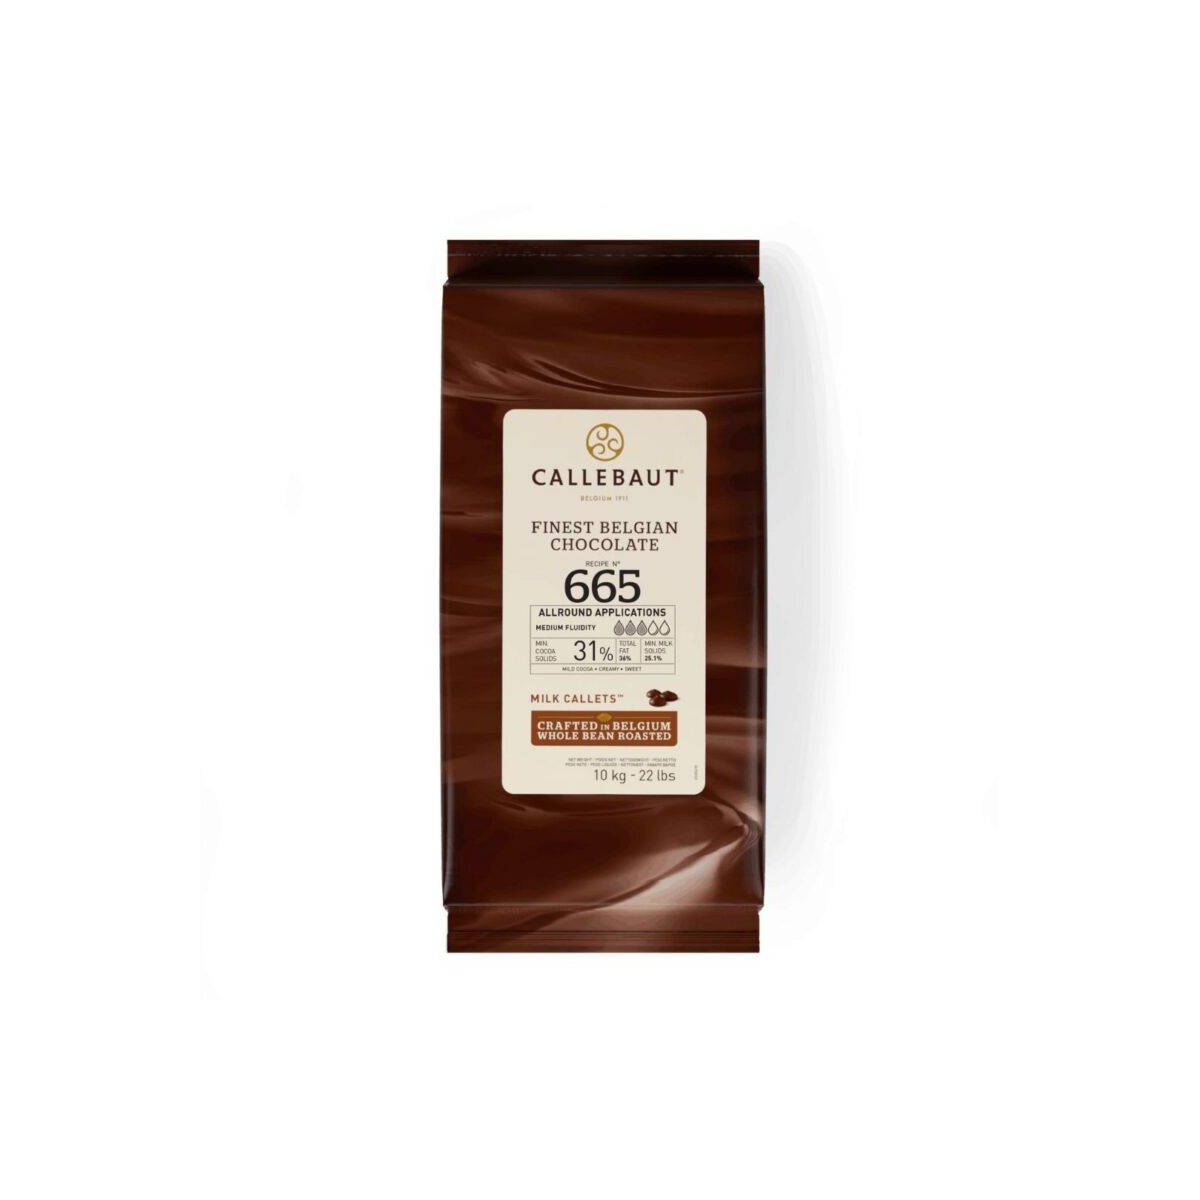 CALLEBAUT 665NV-554 EXTRA LIGHT WHOLE MILK CALLET IN BOX OF 2 BAGS X 10KGKG